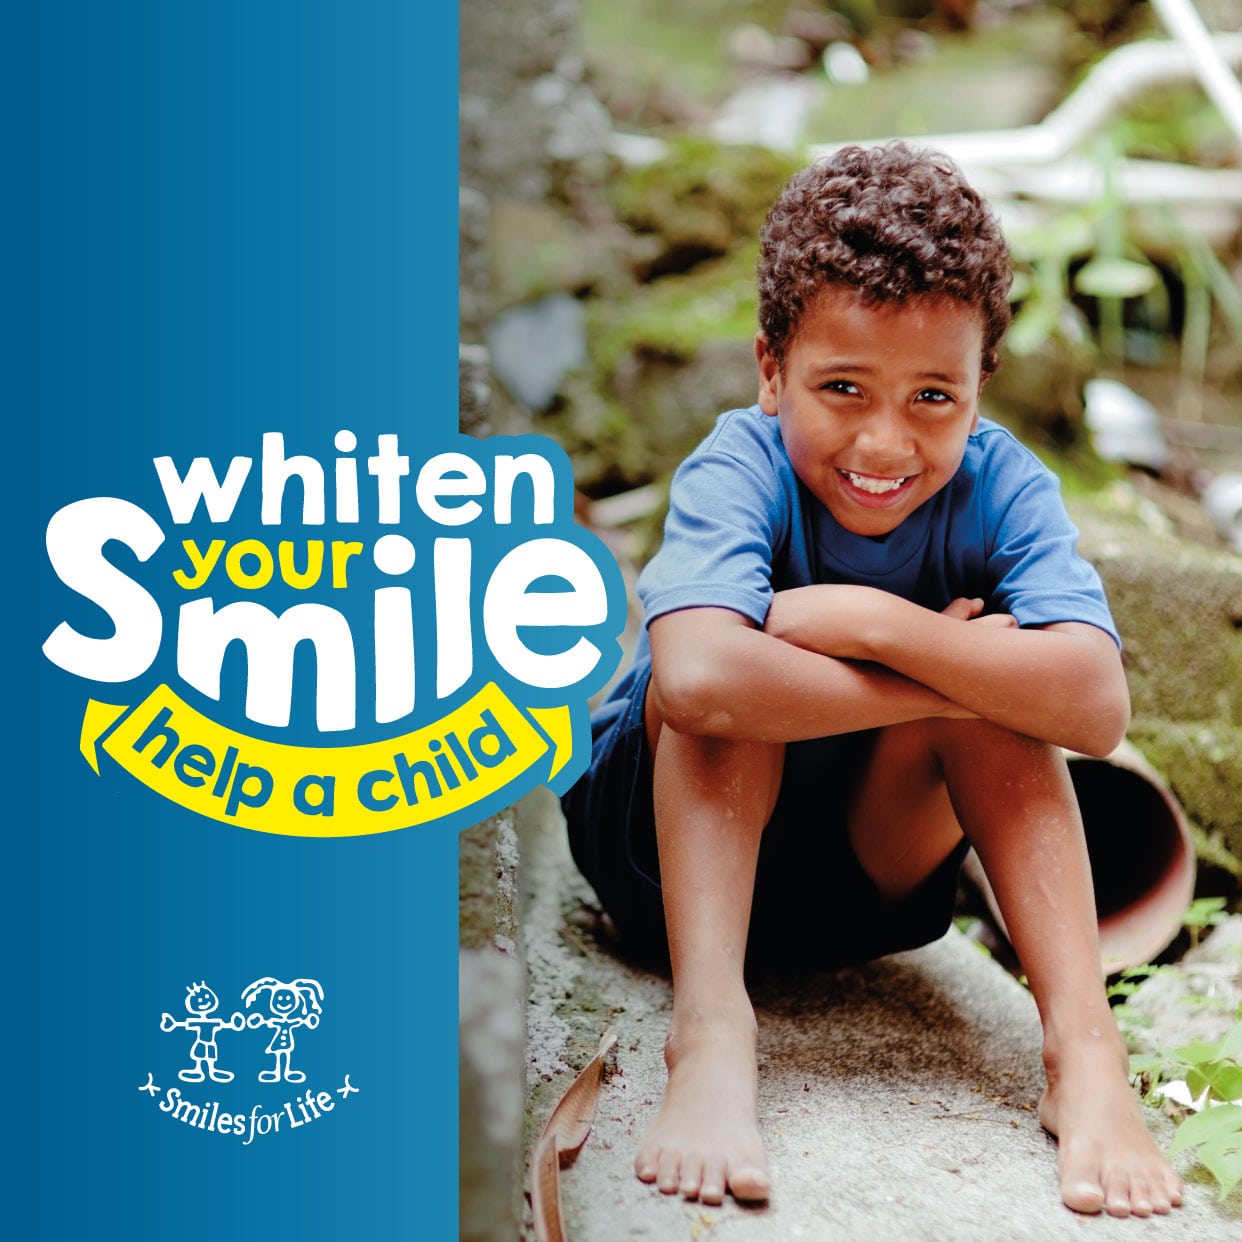 Whiten Your Smile and Help a Child